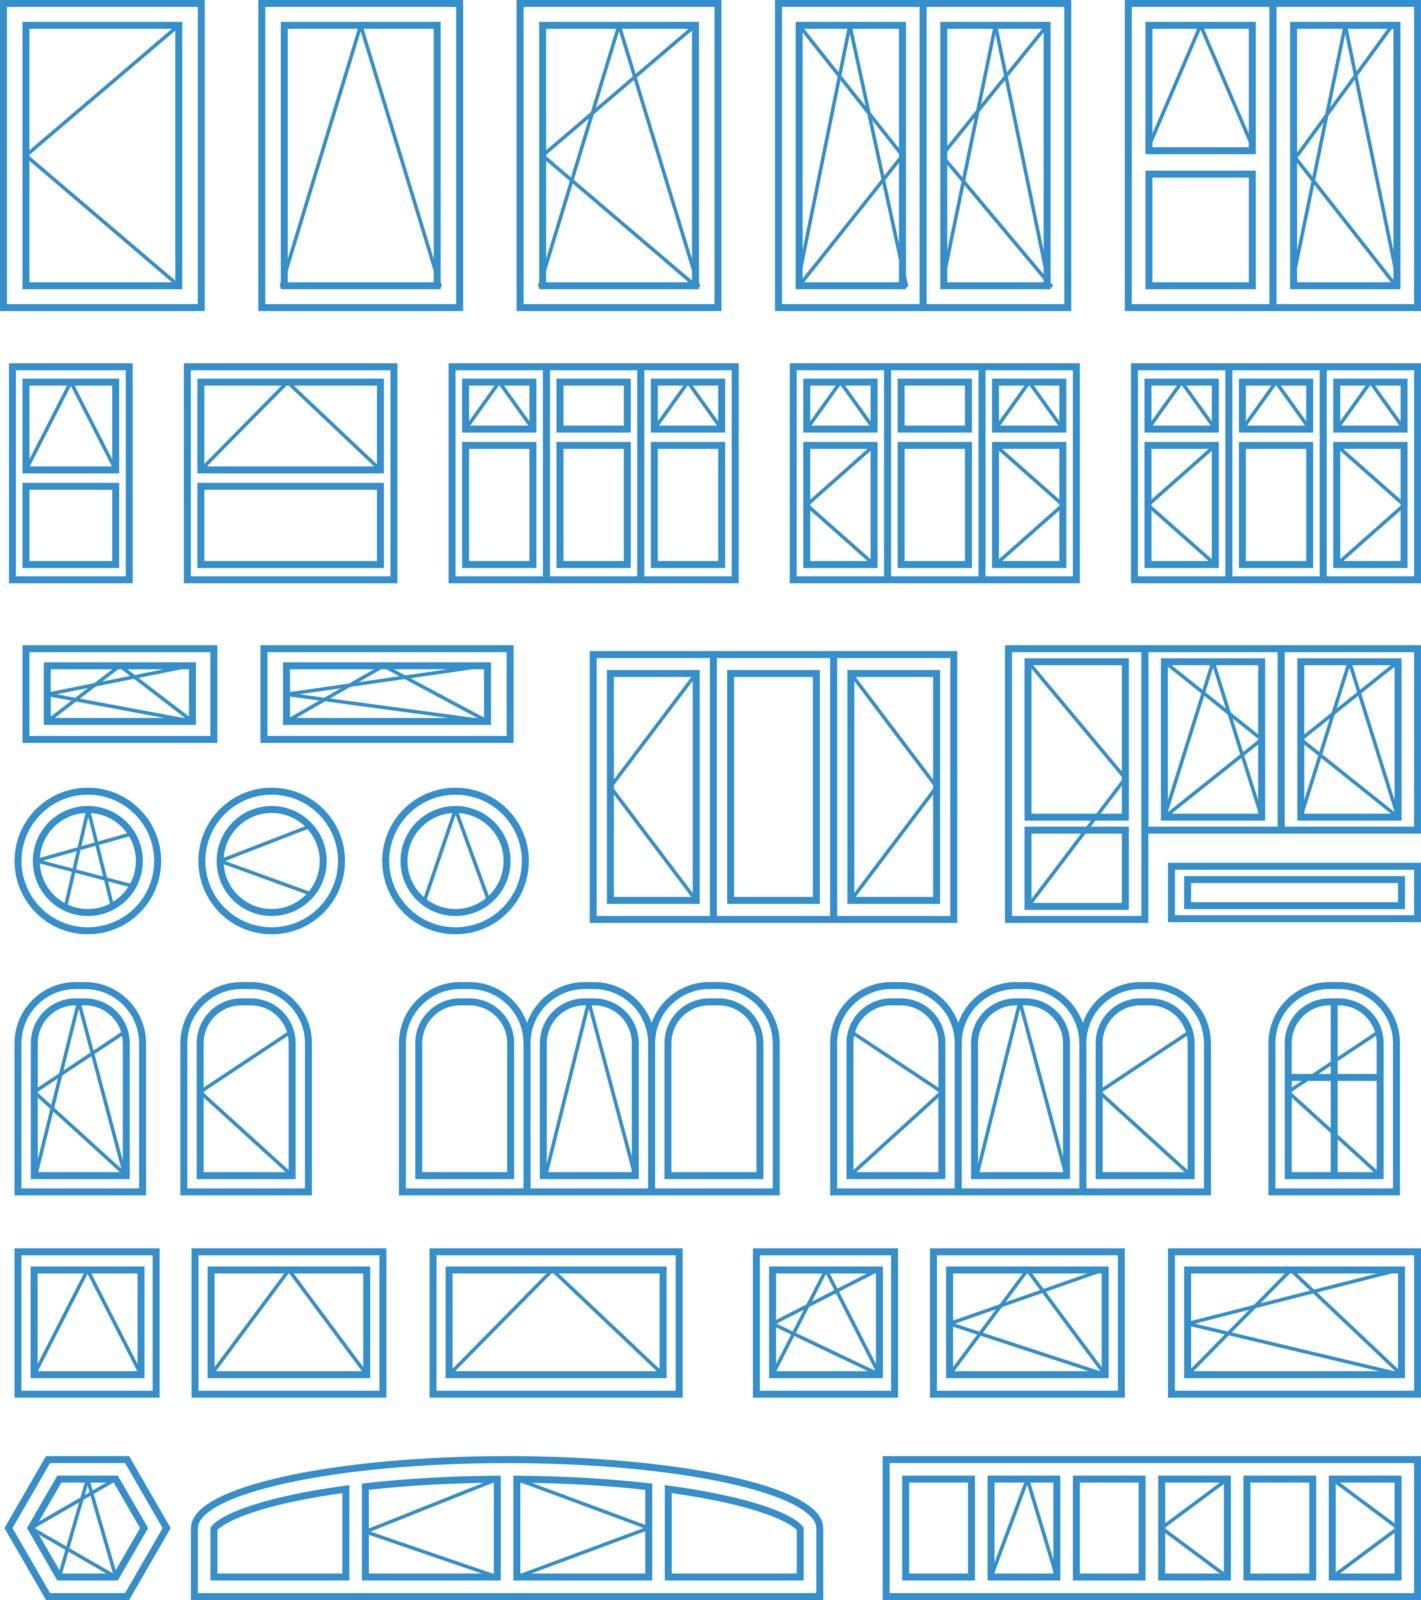 Types of opening and closing windows and doors. Vector illustration by sermax55